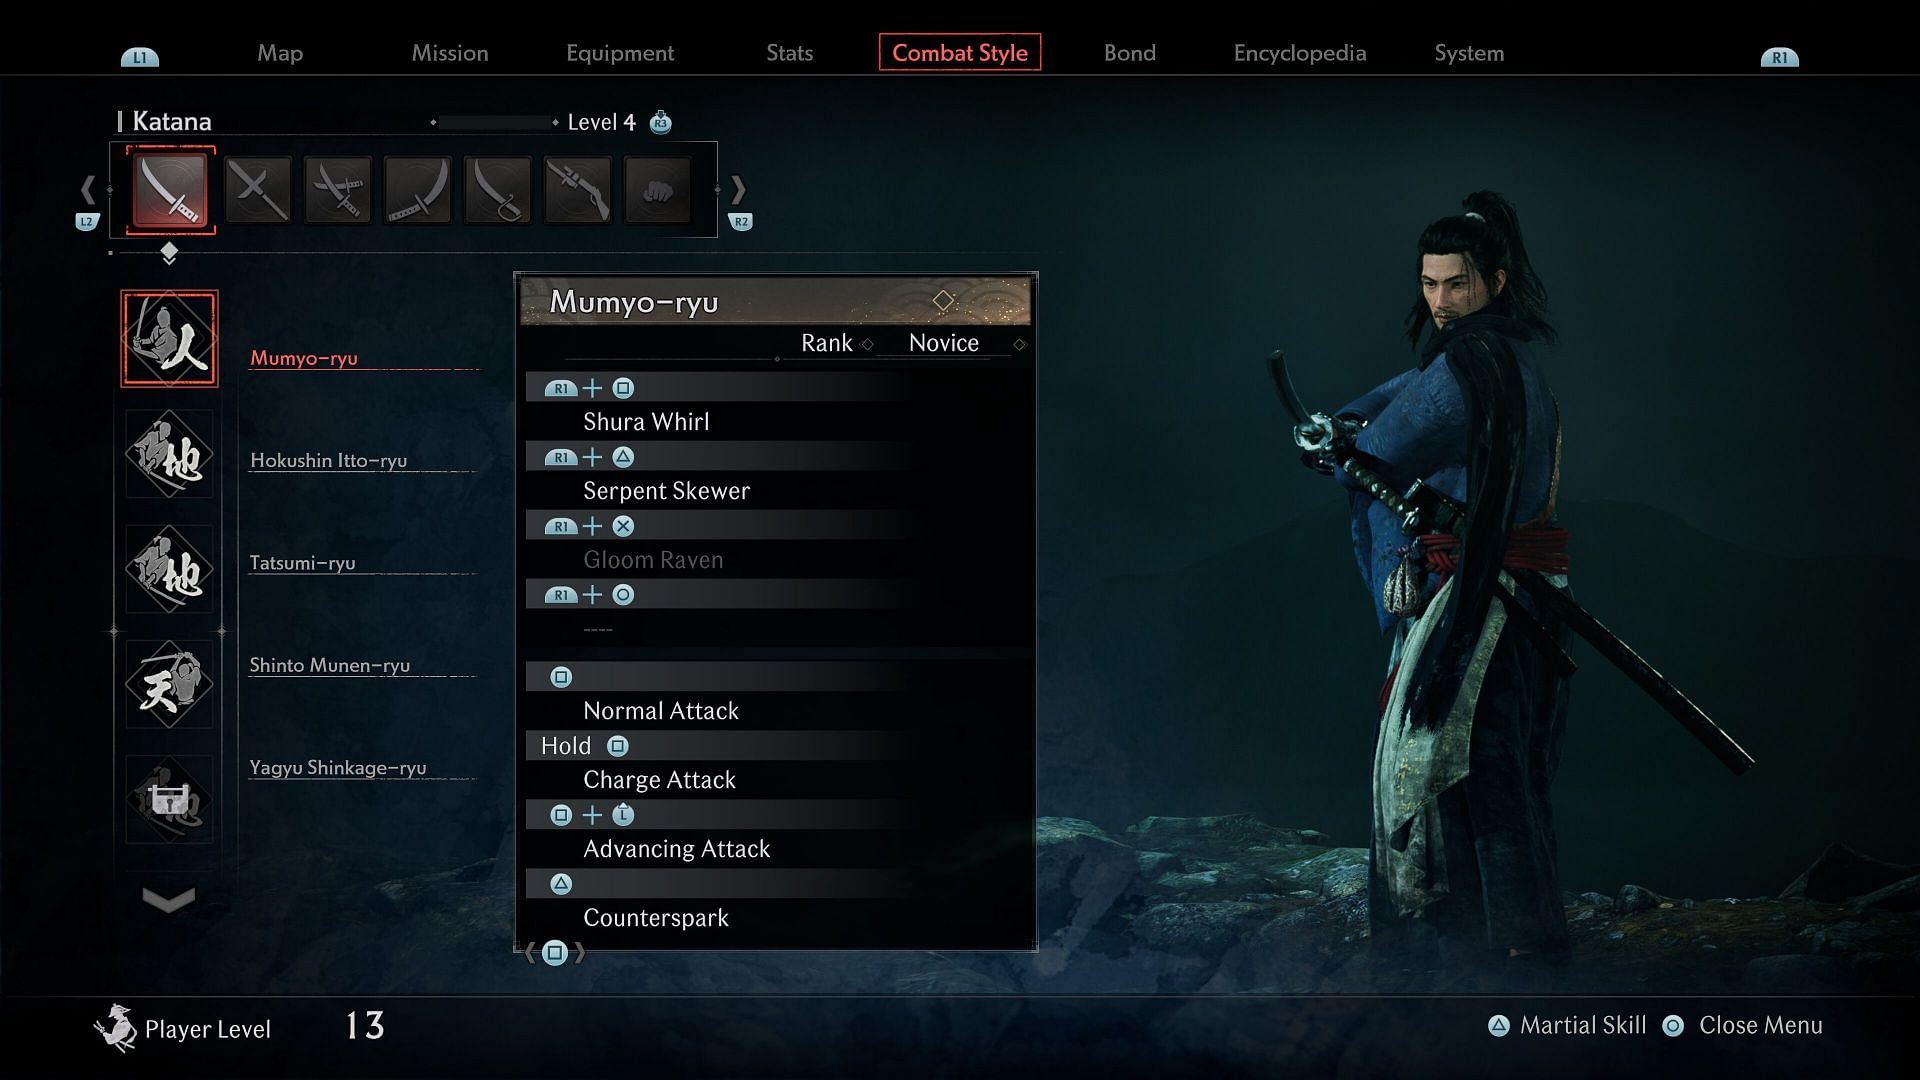 There are various combat styles available in Rise of the Ronin (Image via Team Ninja)